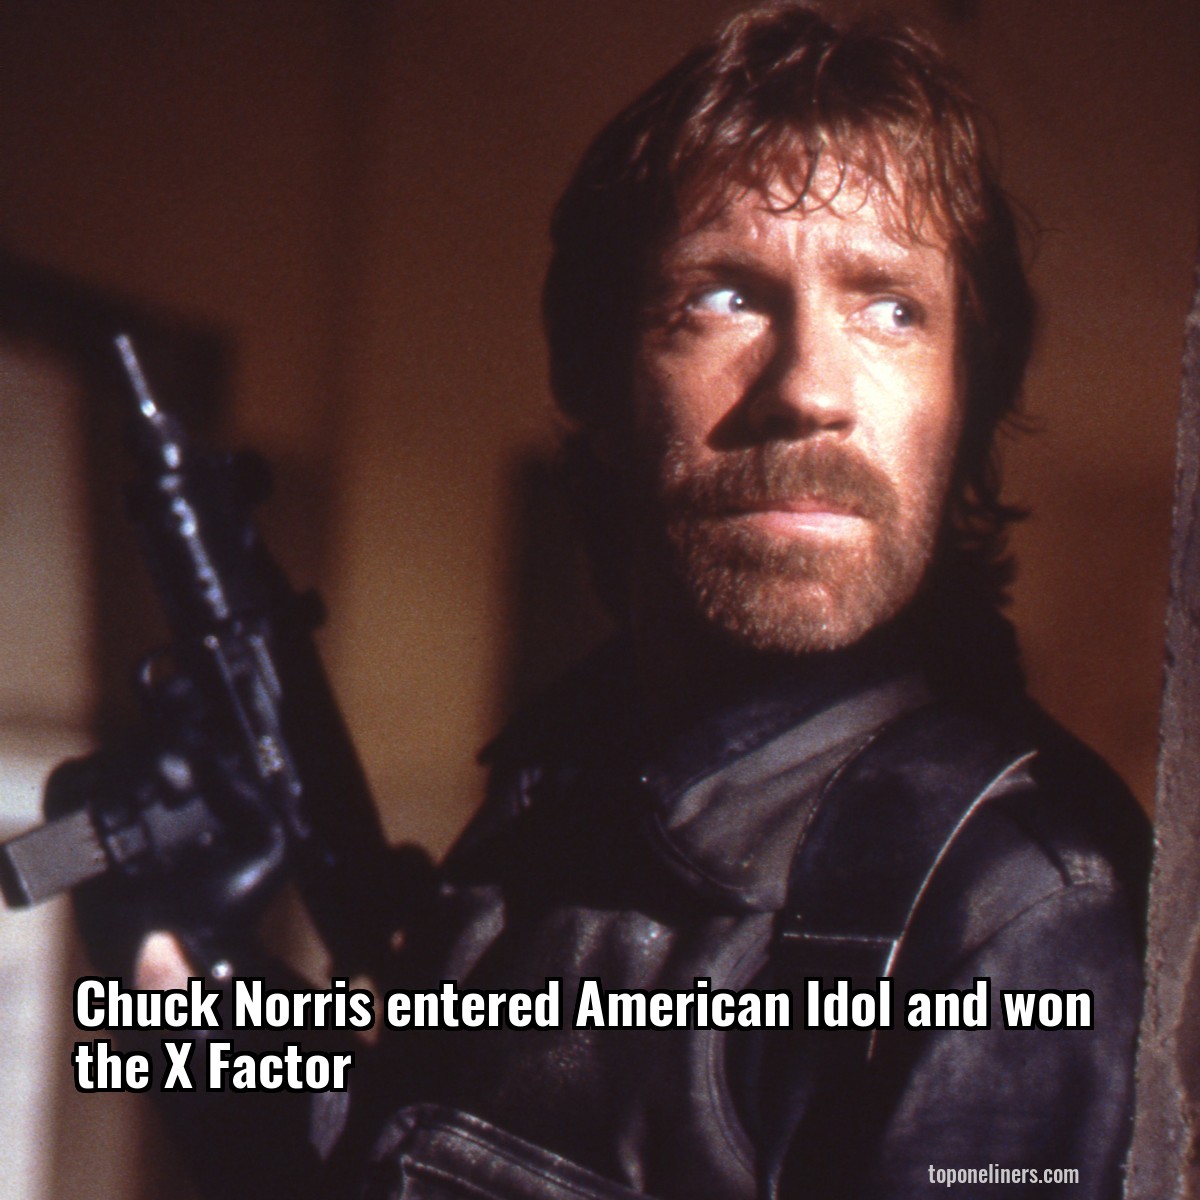 Chuck Norris entered American Idol and won the X Factor